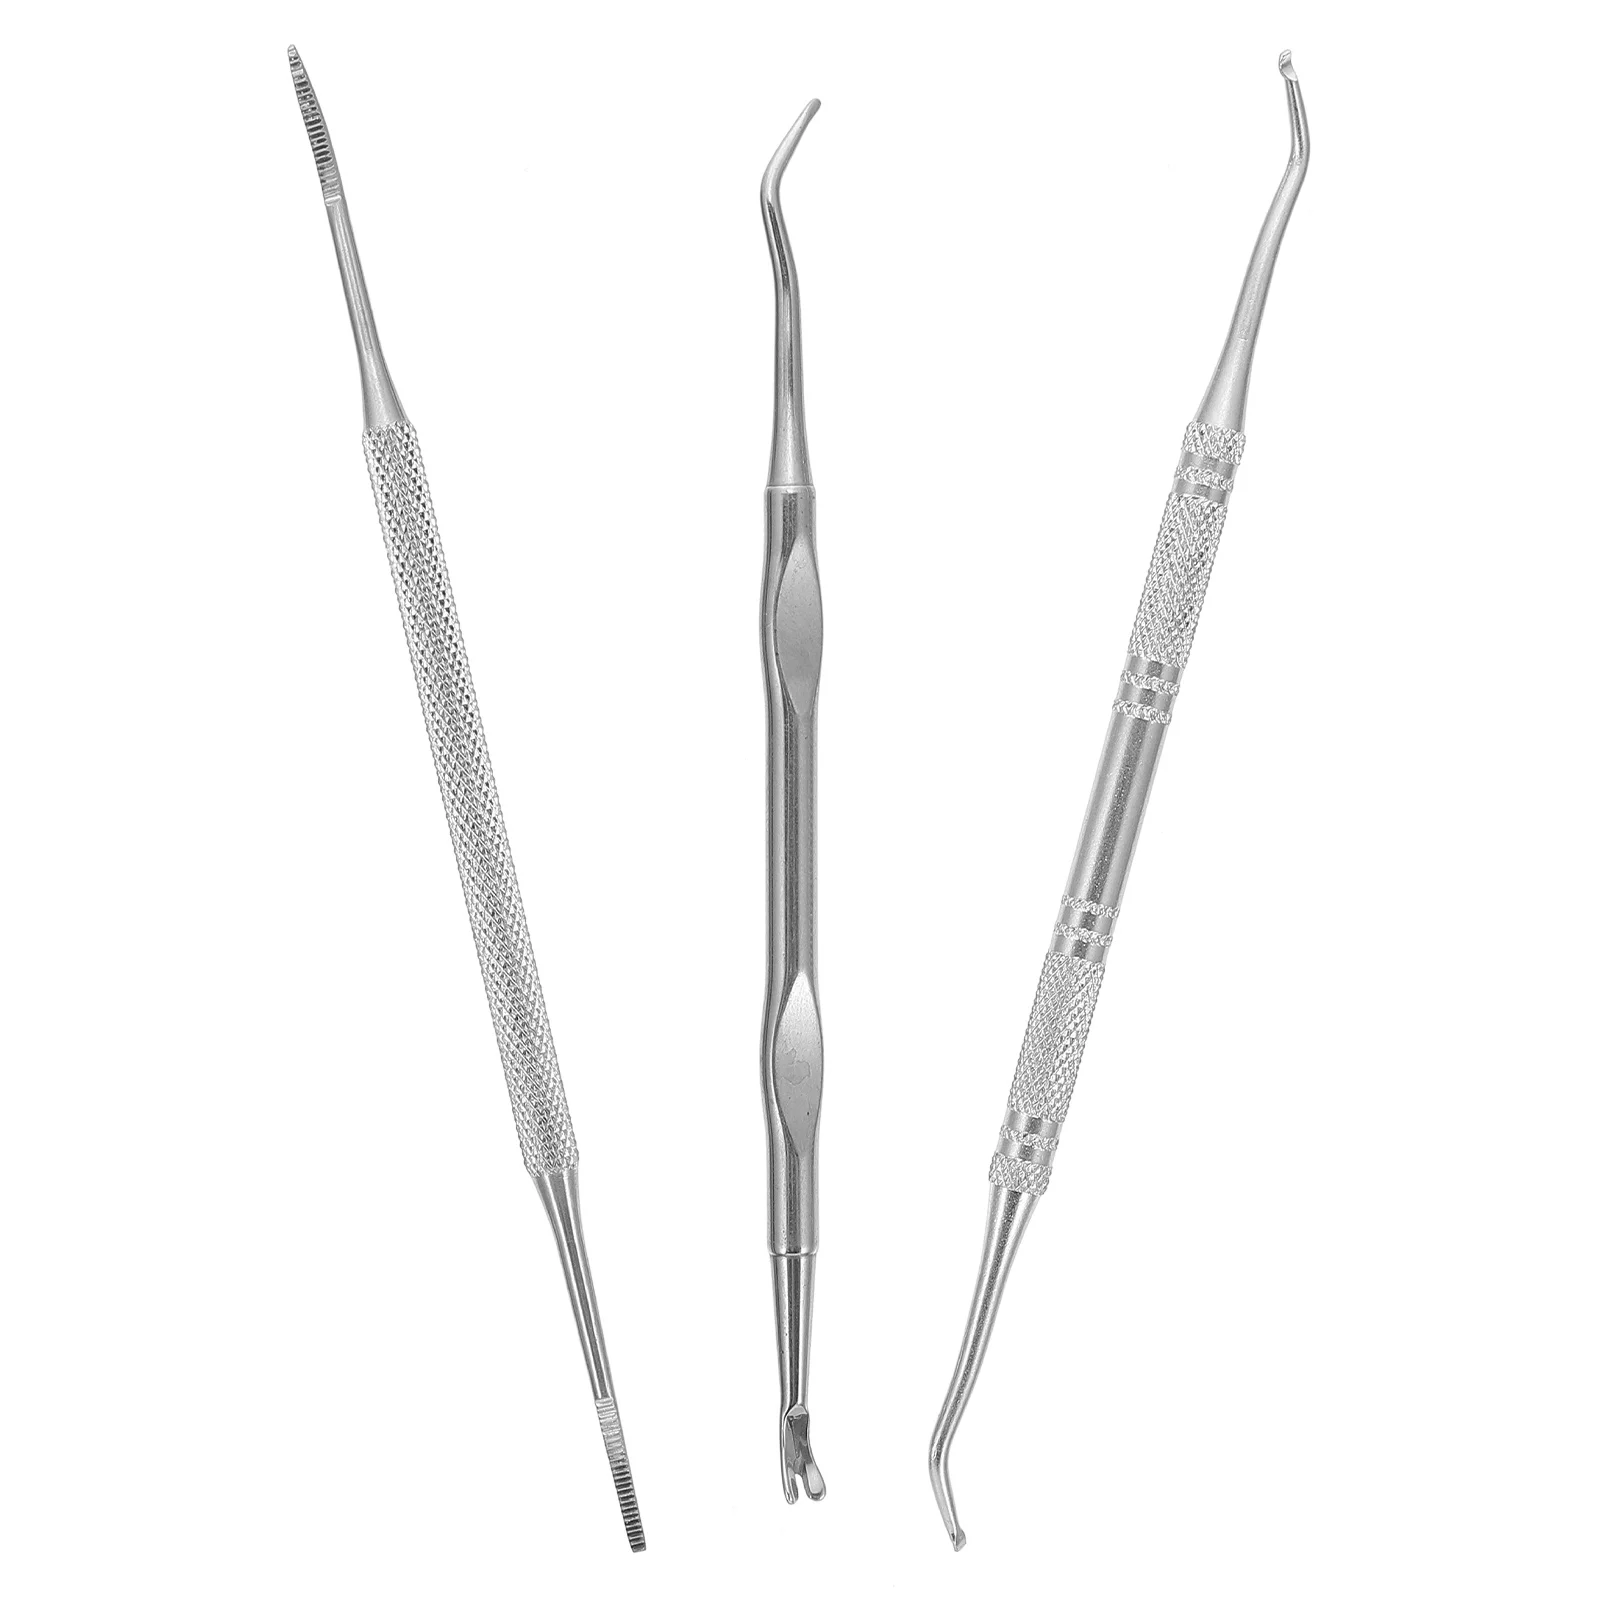 3Pcs Ingrown Toenail File Double-end Nail Cleaner Stainless Steel Tool Ingrown Toenail Lifter 3pcs hook ingrown double ended ingrown toe correction lifter file toe nail care manicure pedicure toenails clean foot care tool